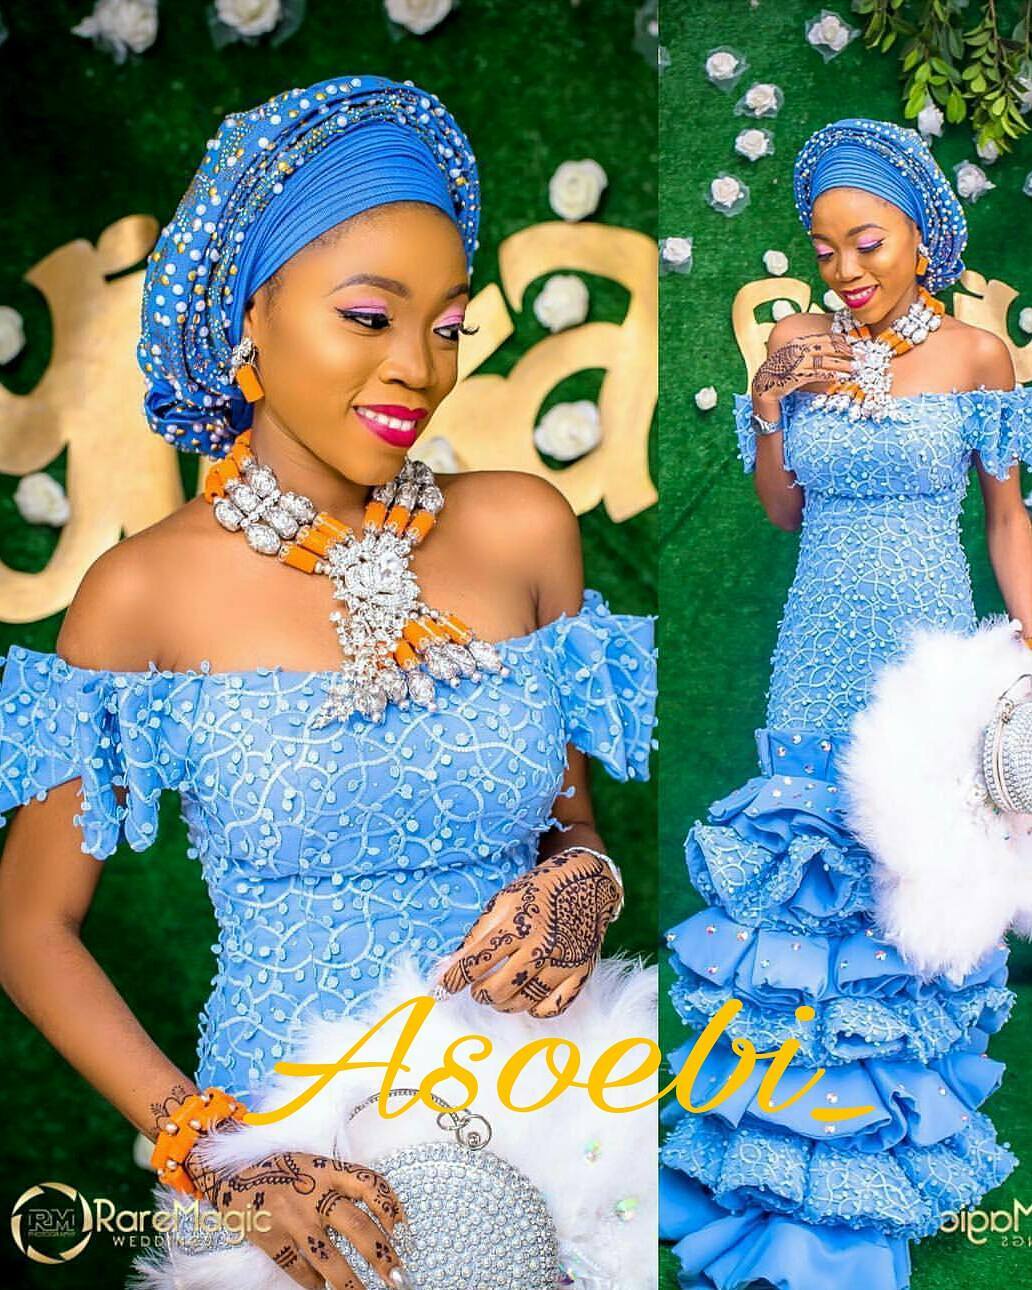  Would You Rock These Brides’ Traditional Outfits?